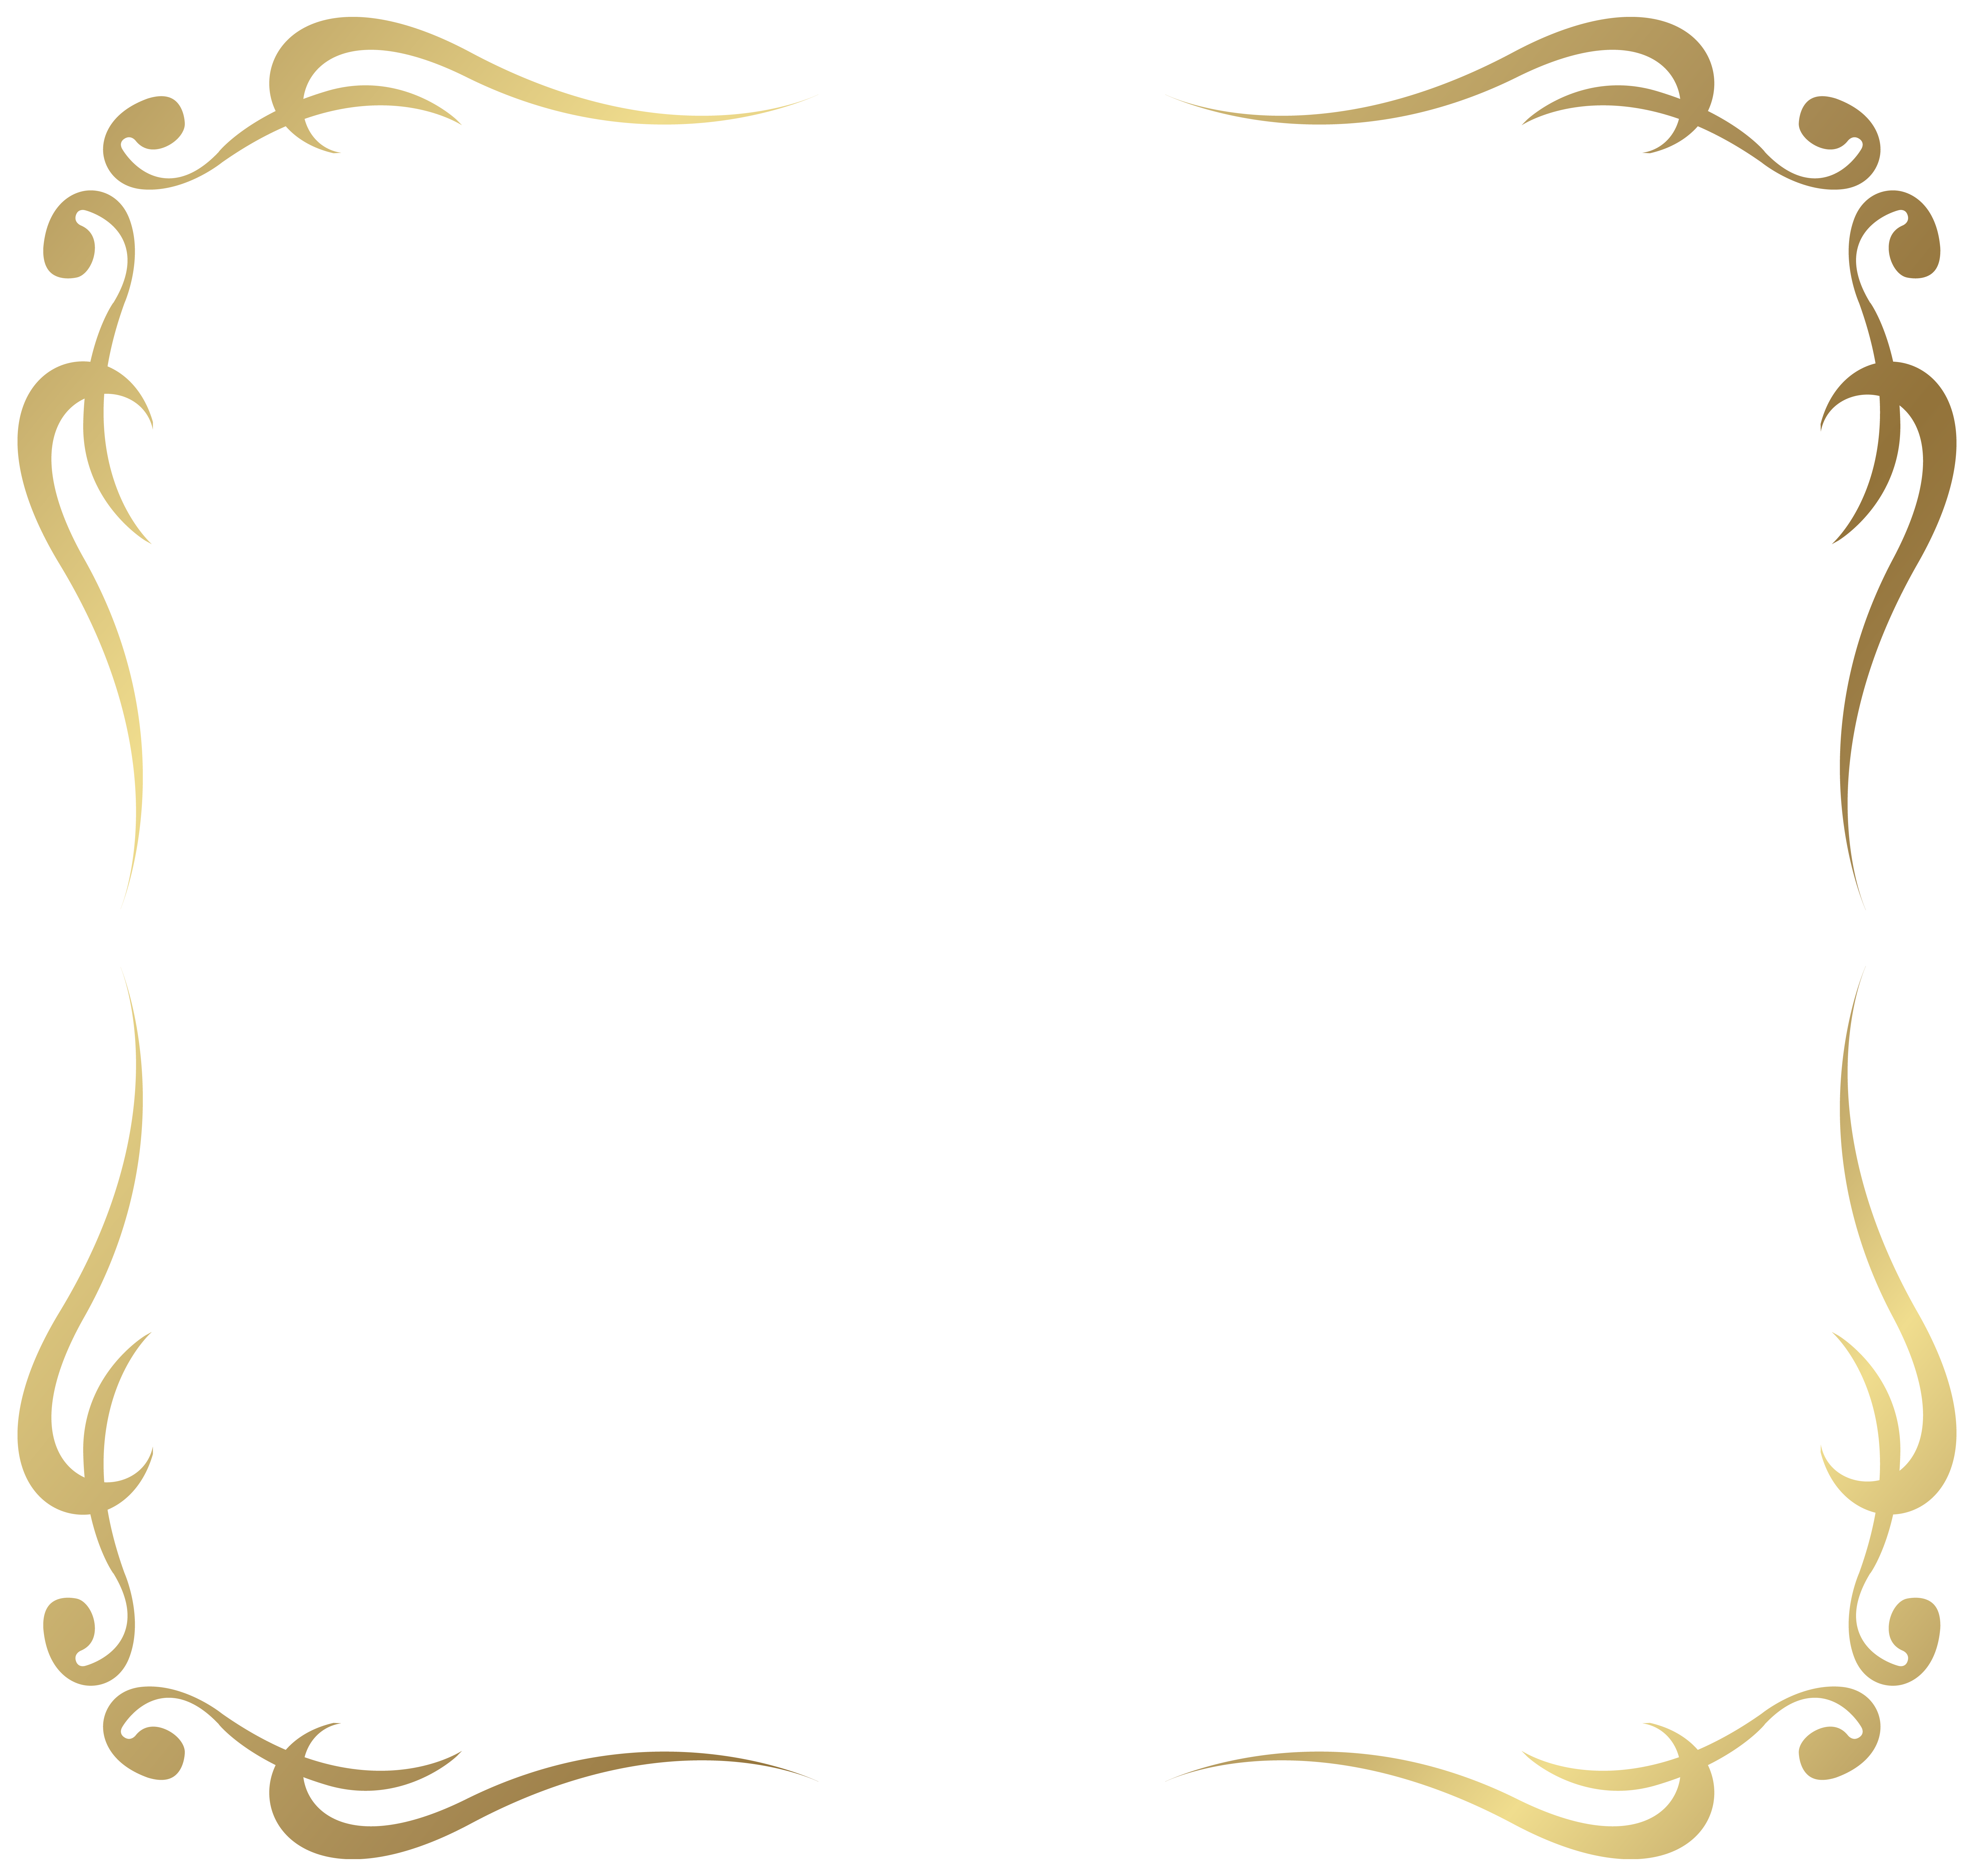 Decorative Picture Frame Border Gold Free Download PNG HD Clipart